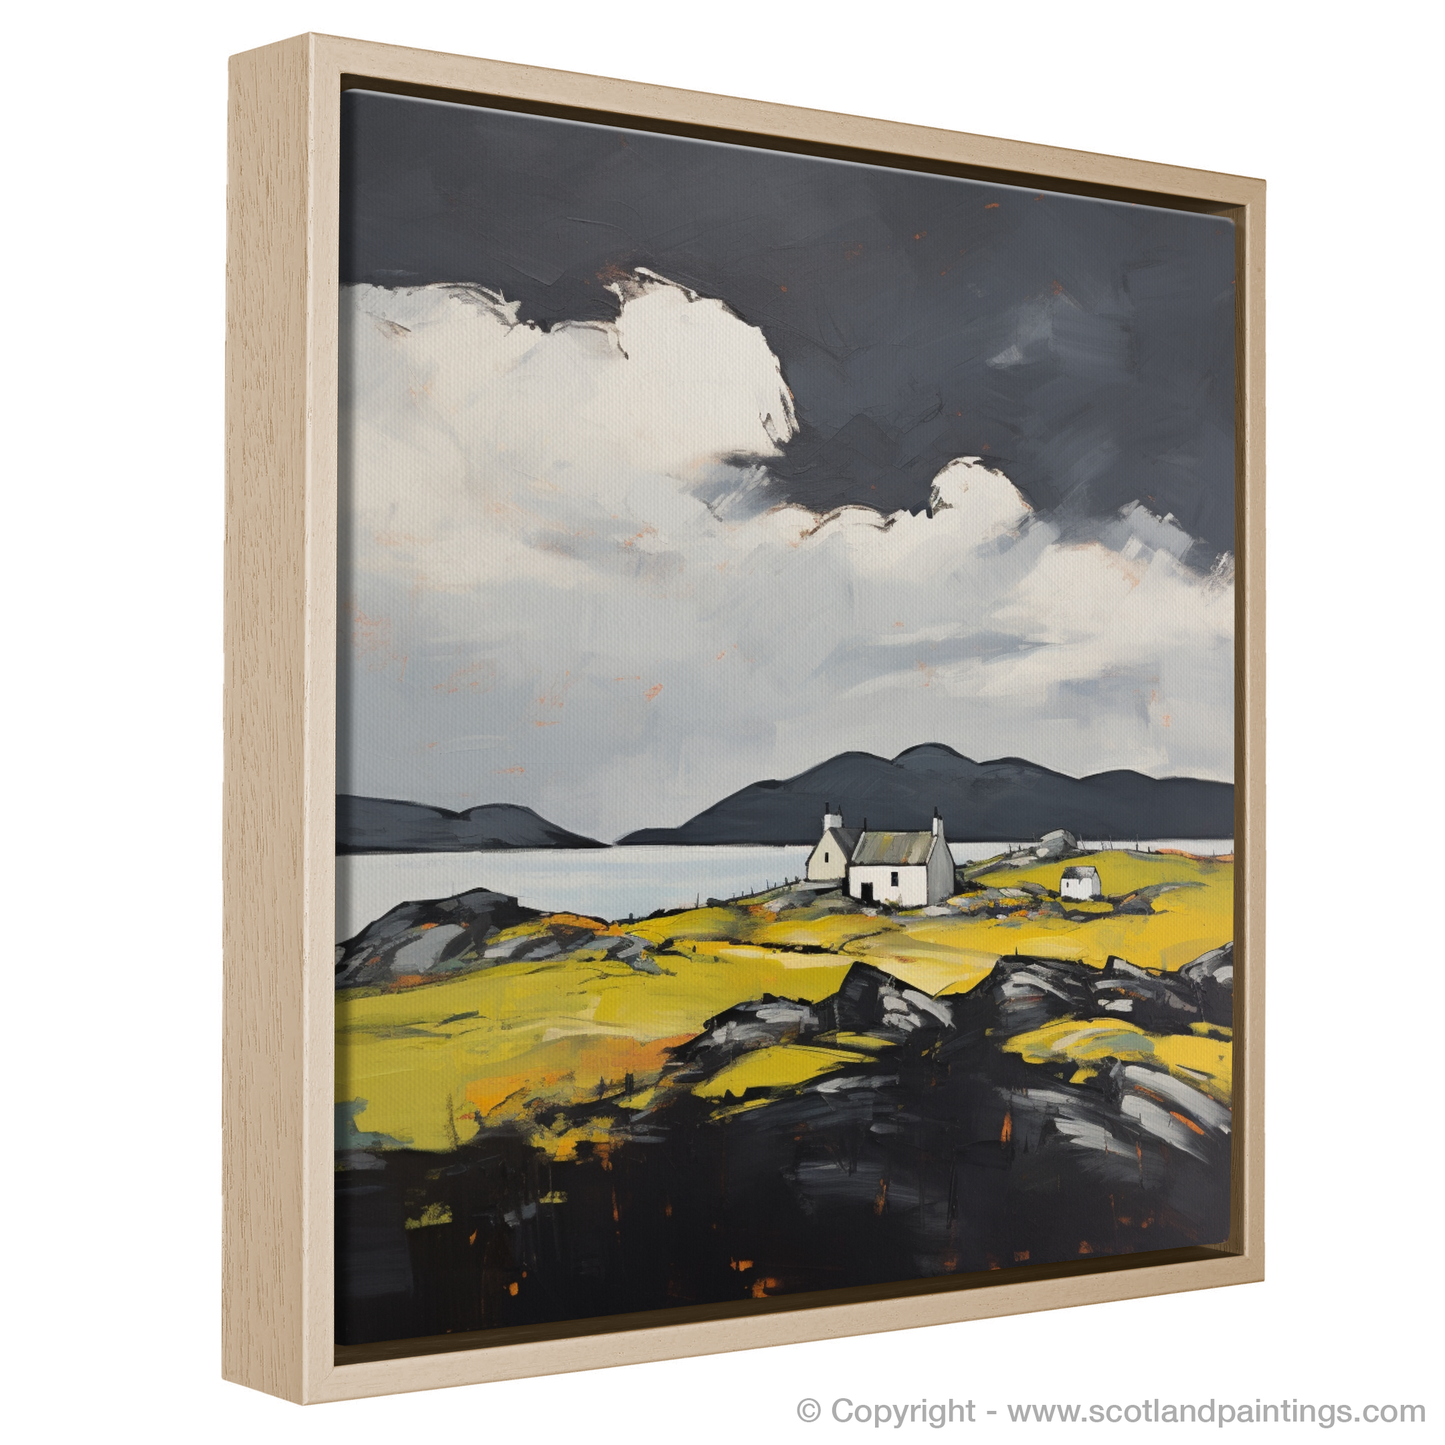 Painting and Art Print of Isle of Barra, Outer Hebrides entitled "Expressionism of Barra: A Rugged Charm Revealed".